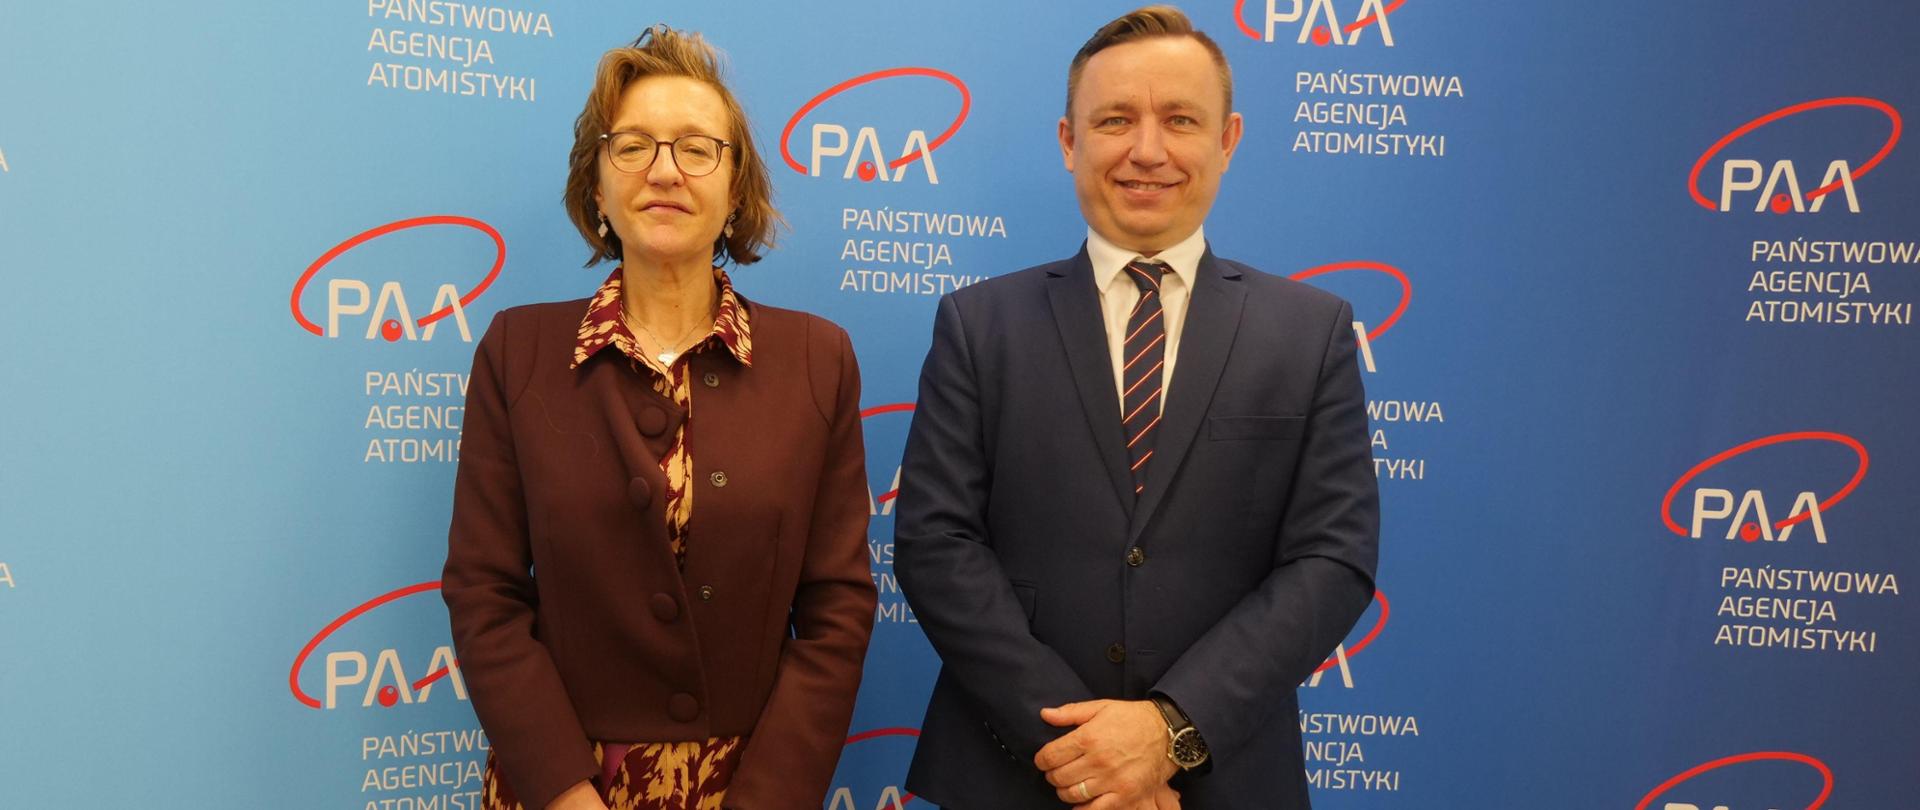 Meeting of the President of the PAA with the Director of the IAEA’s Nuclear Power Division